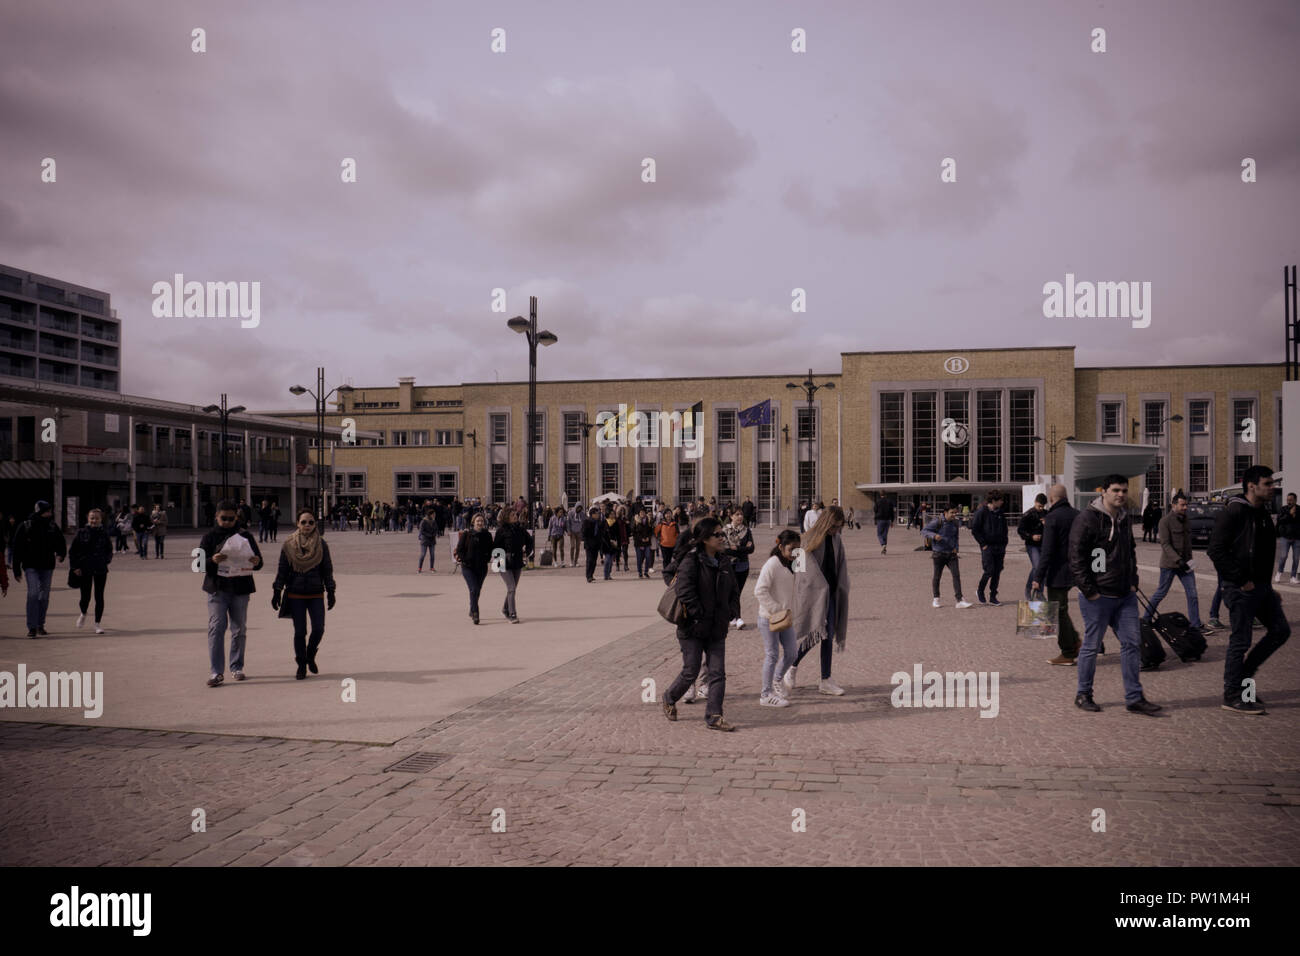 Brugge, Belgium - April 17 : The Brugge railway station on June 17, 2017. People walk in front of the railway station on a cloudy morning Stock Photo